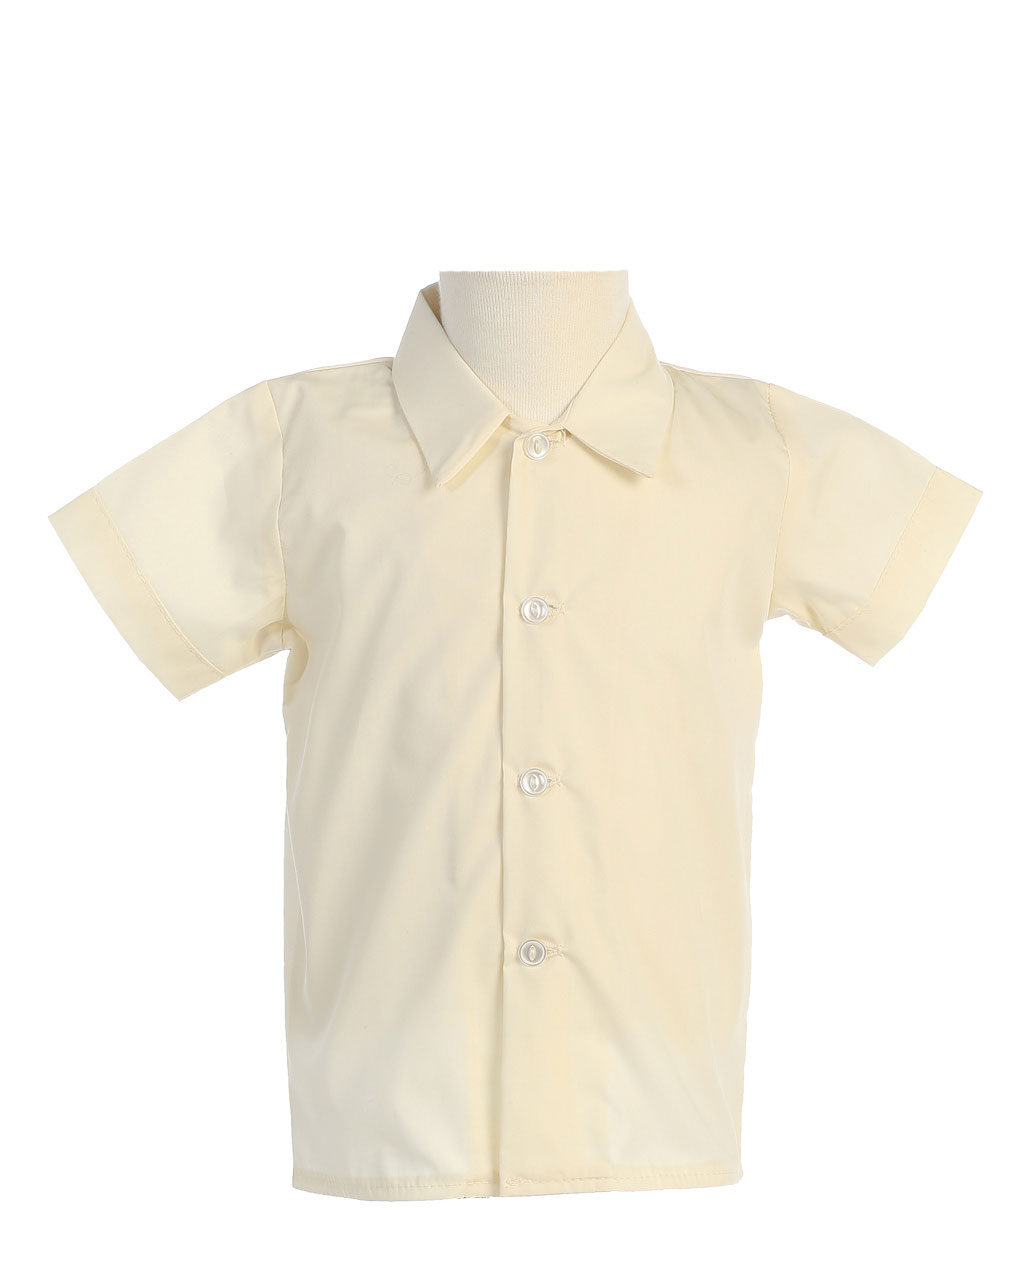 Boys Short Sleeved Simple Dress Shirt - Available in Ivory L